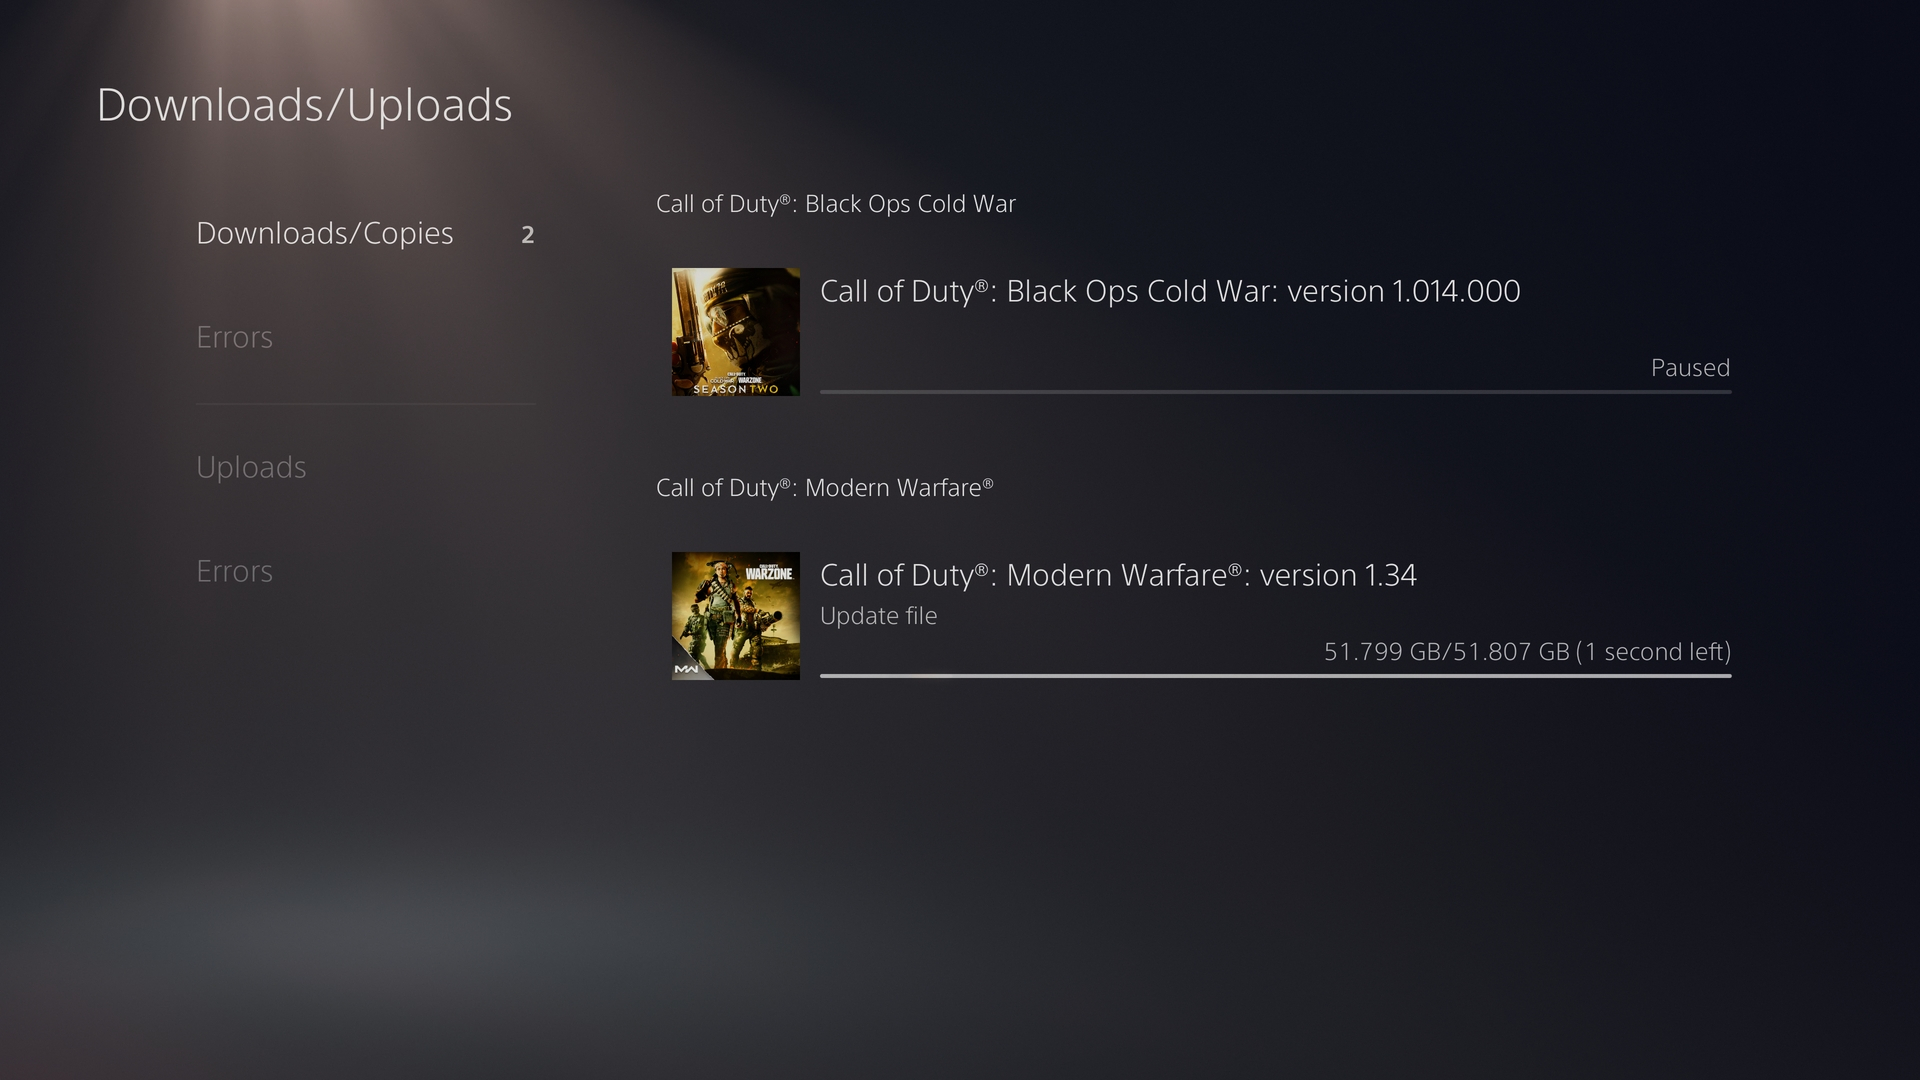 PS5 download speed: Call of Duty Black Ops Cold War and Modern Warfare in the downloads menu.